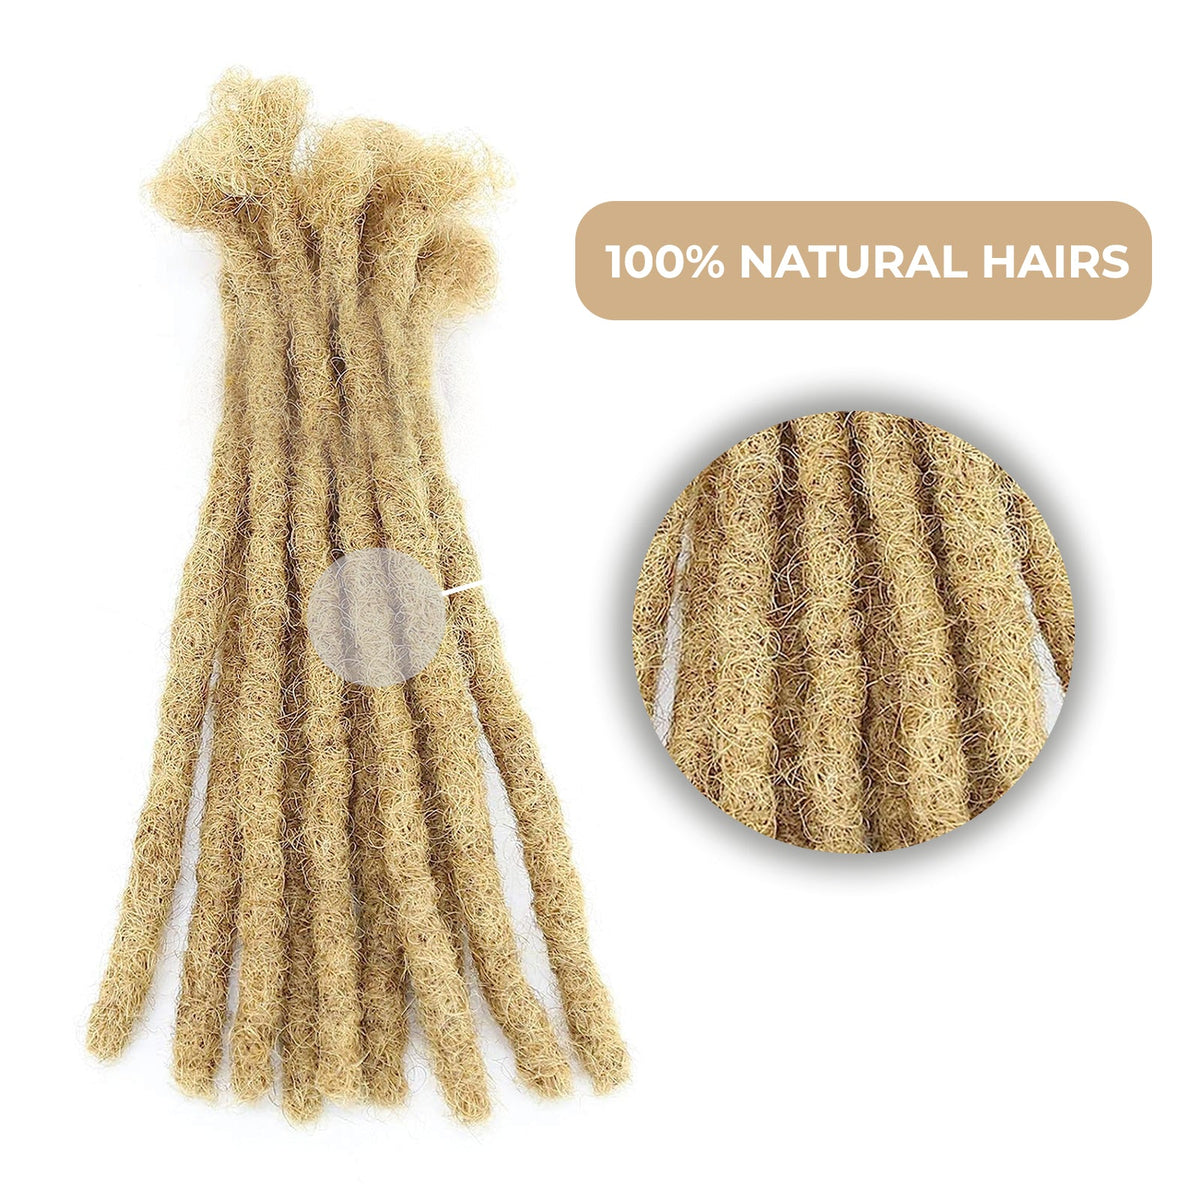 100% Human Hair Blonde Dreadlock Extensions 8Inch 10 Strands Handmade Natural Loc Extensions Human Hair Bundle Dreads Extensions For Woman & Men Can be Dyed (27/Honey Blonde 8inch length 0.2cm Width)